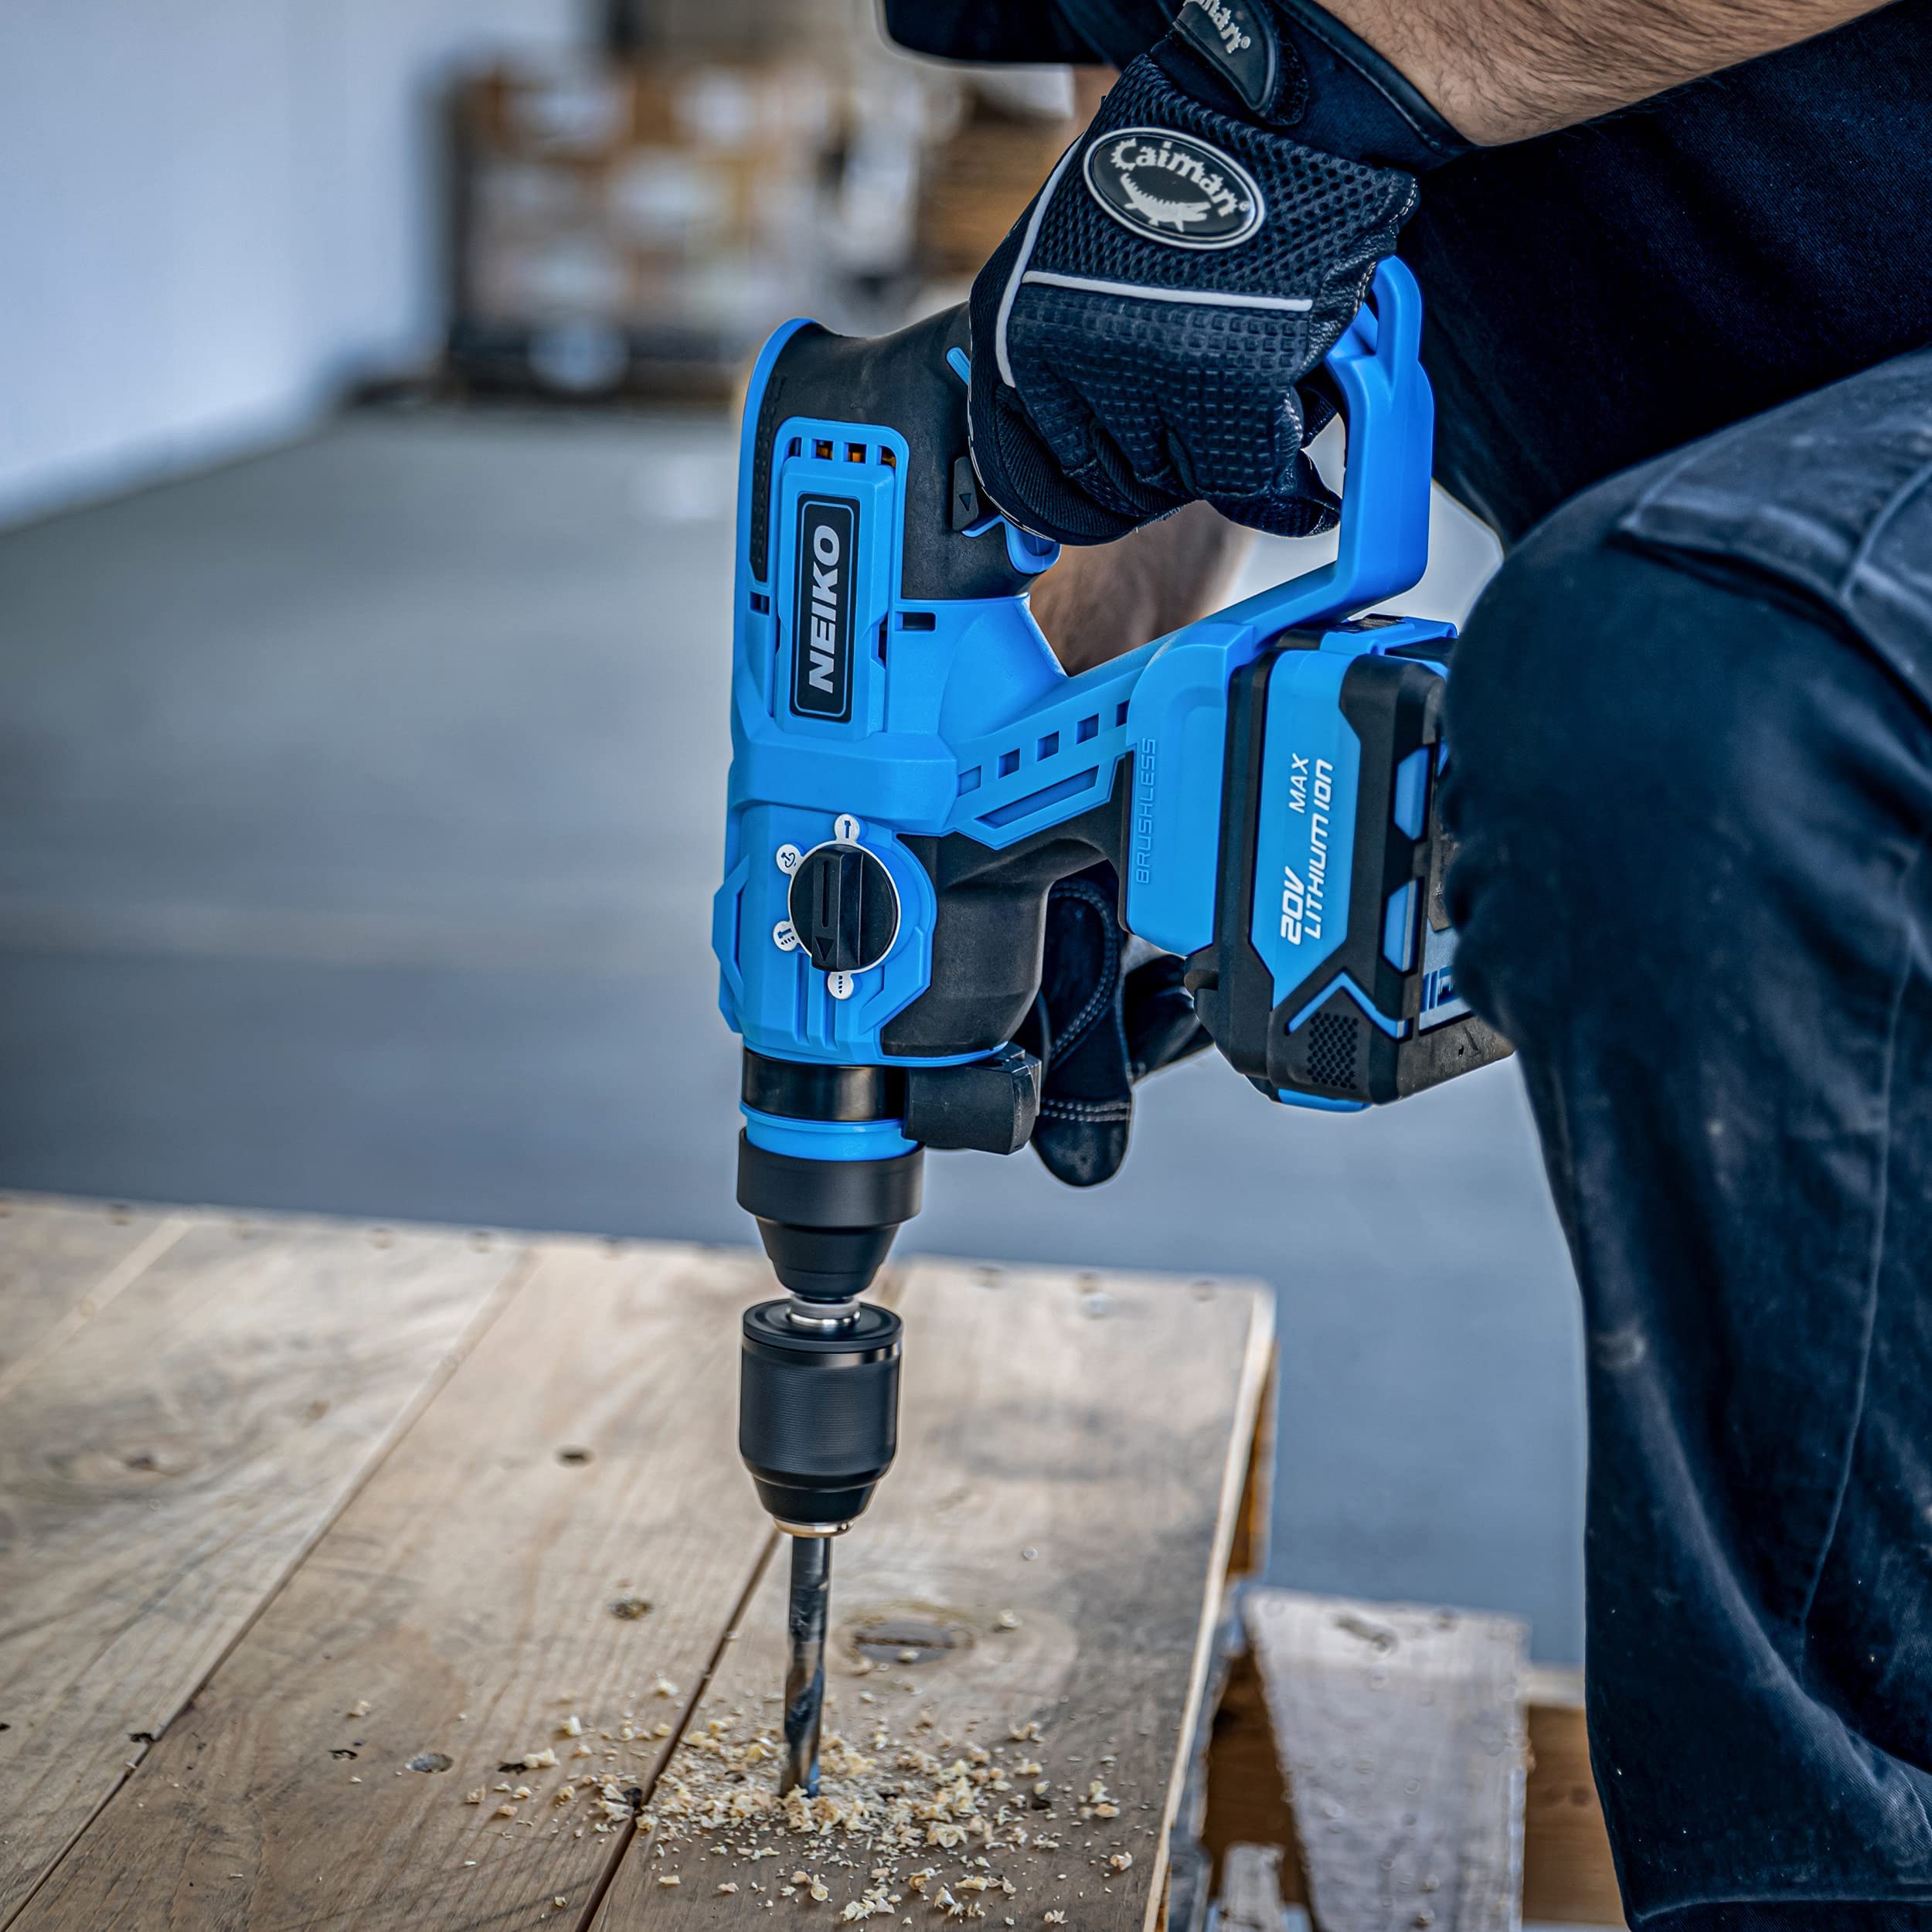 NEIKO 10882A Cordless Rotary Hammer Drill, Includes 20-Volt Li-ion Rechargeable Battery, Fast Charger, SDS Plus Hammer Drill, Heavy Duty Brushless Demolition Hammer, Cordless Hammer Drill, Rotohammer